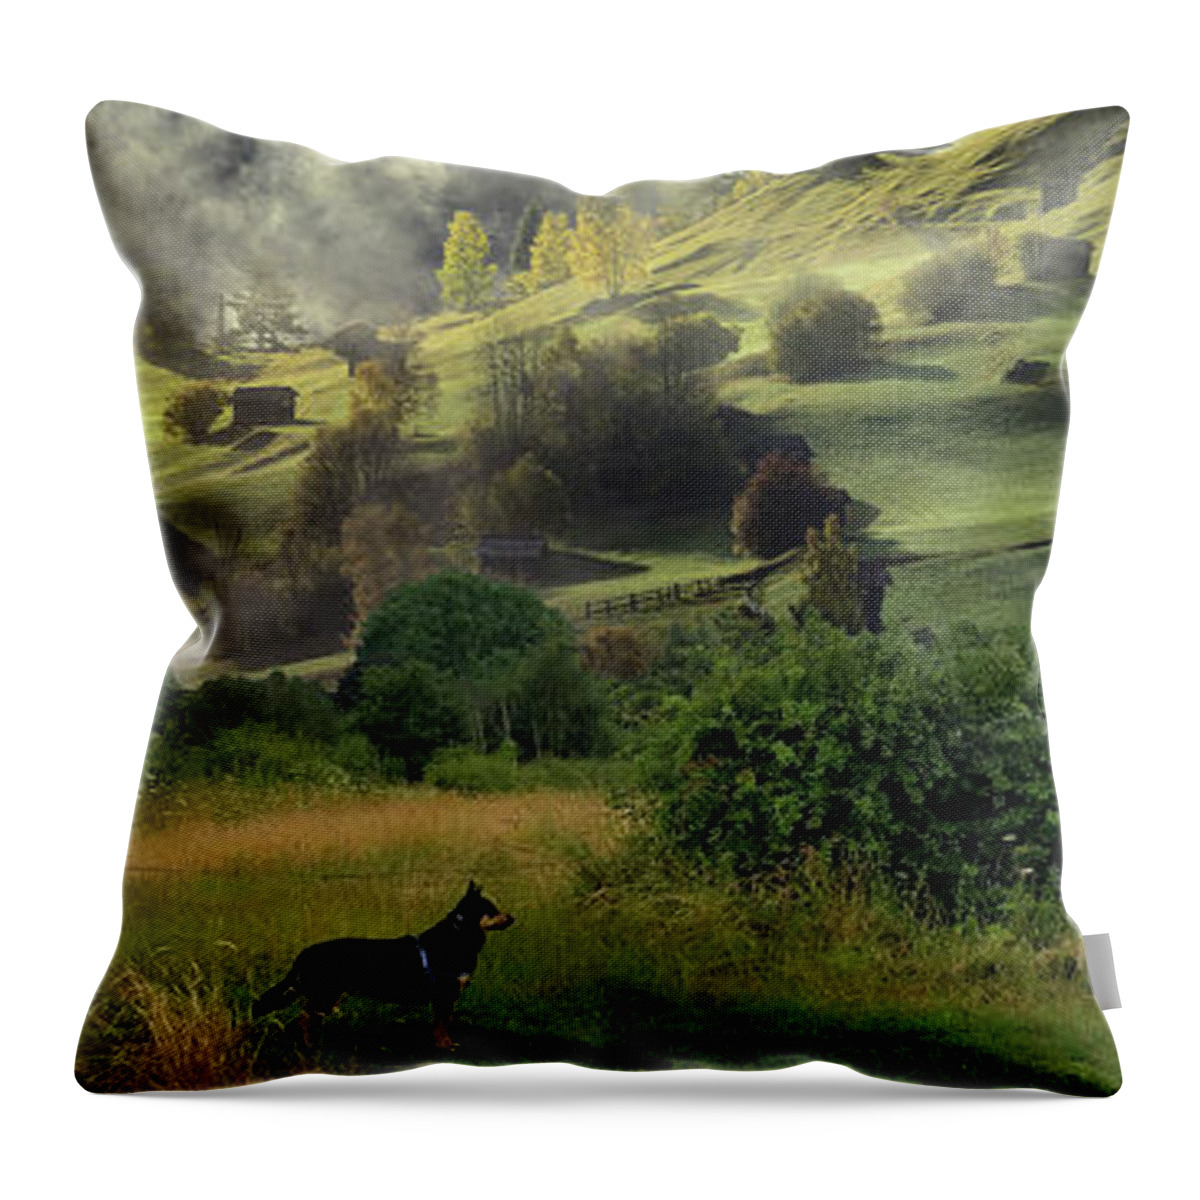 English Countryside Throw Pillow featuring the digital art English Countryside Wide Format by Kathy Kelly